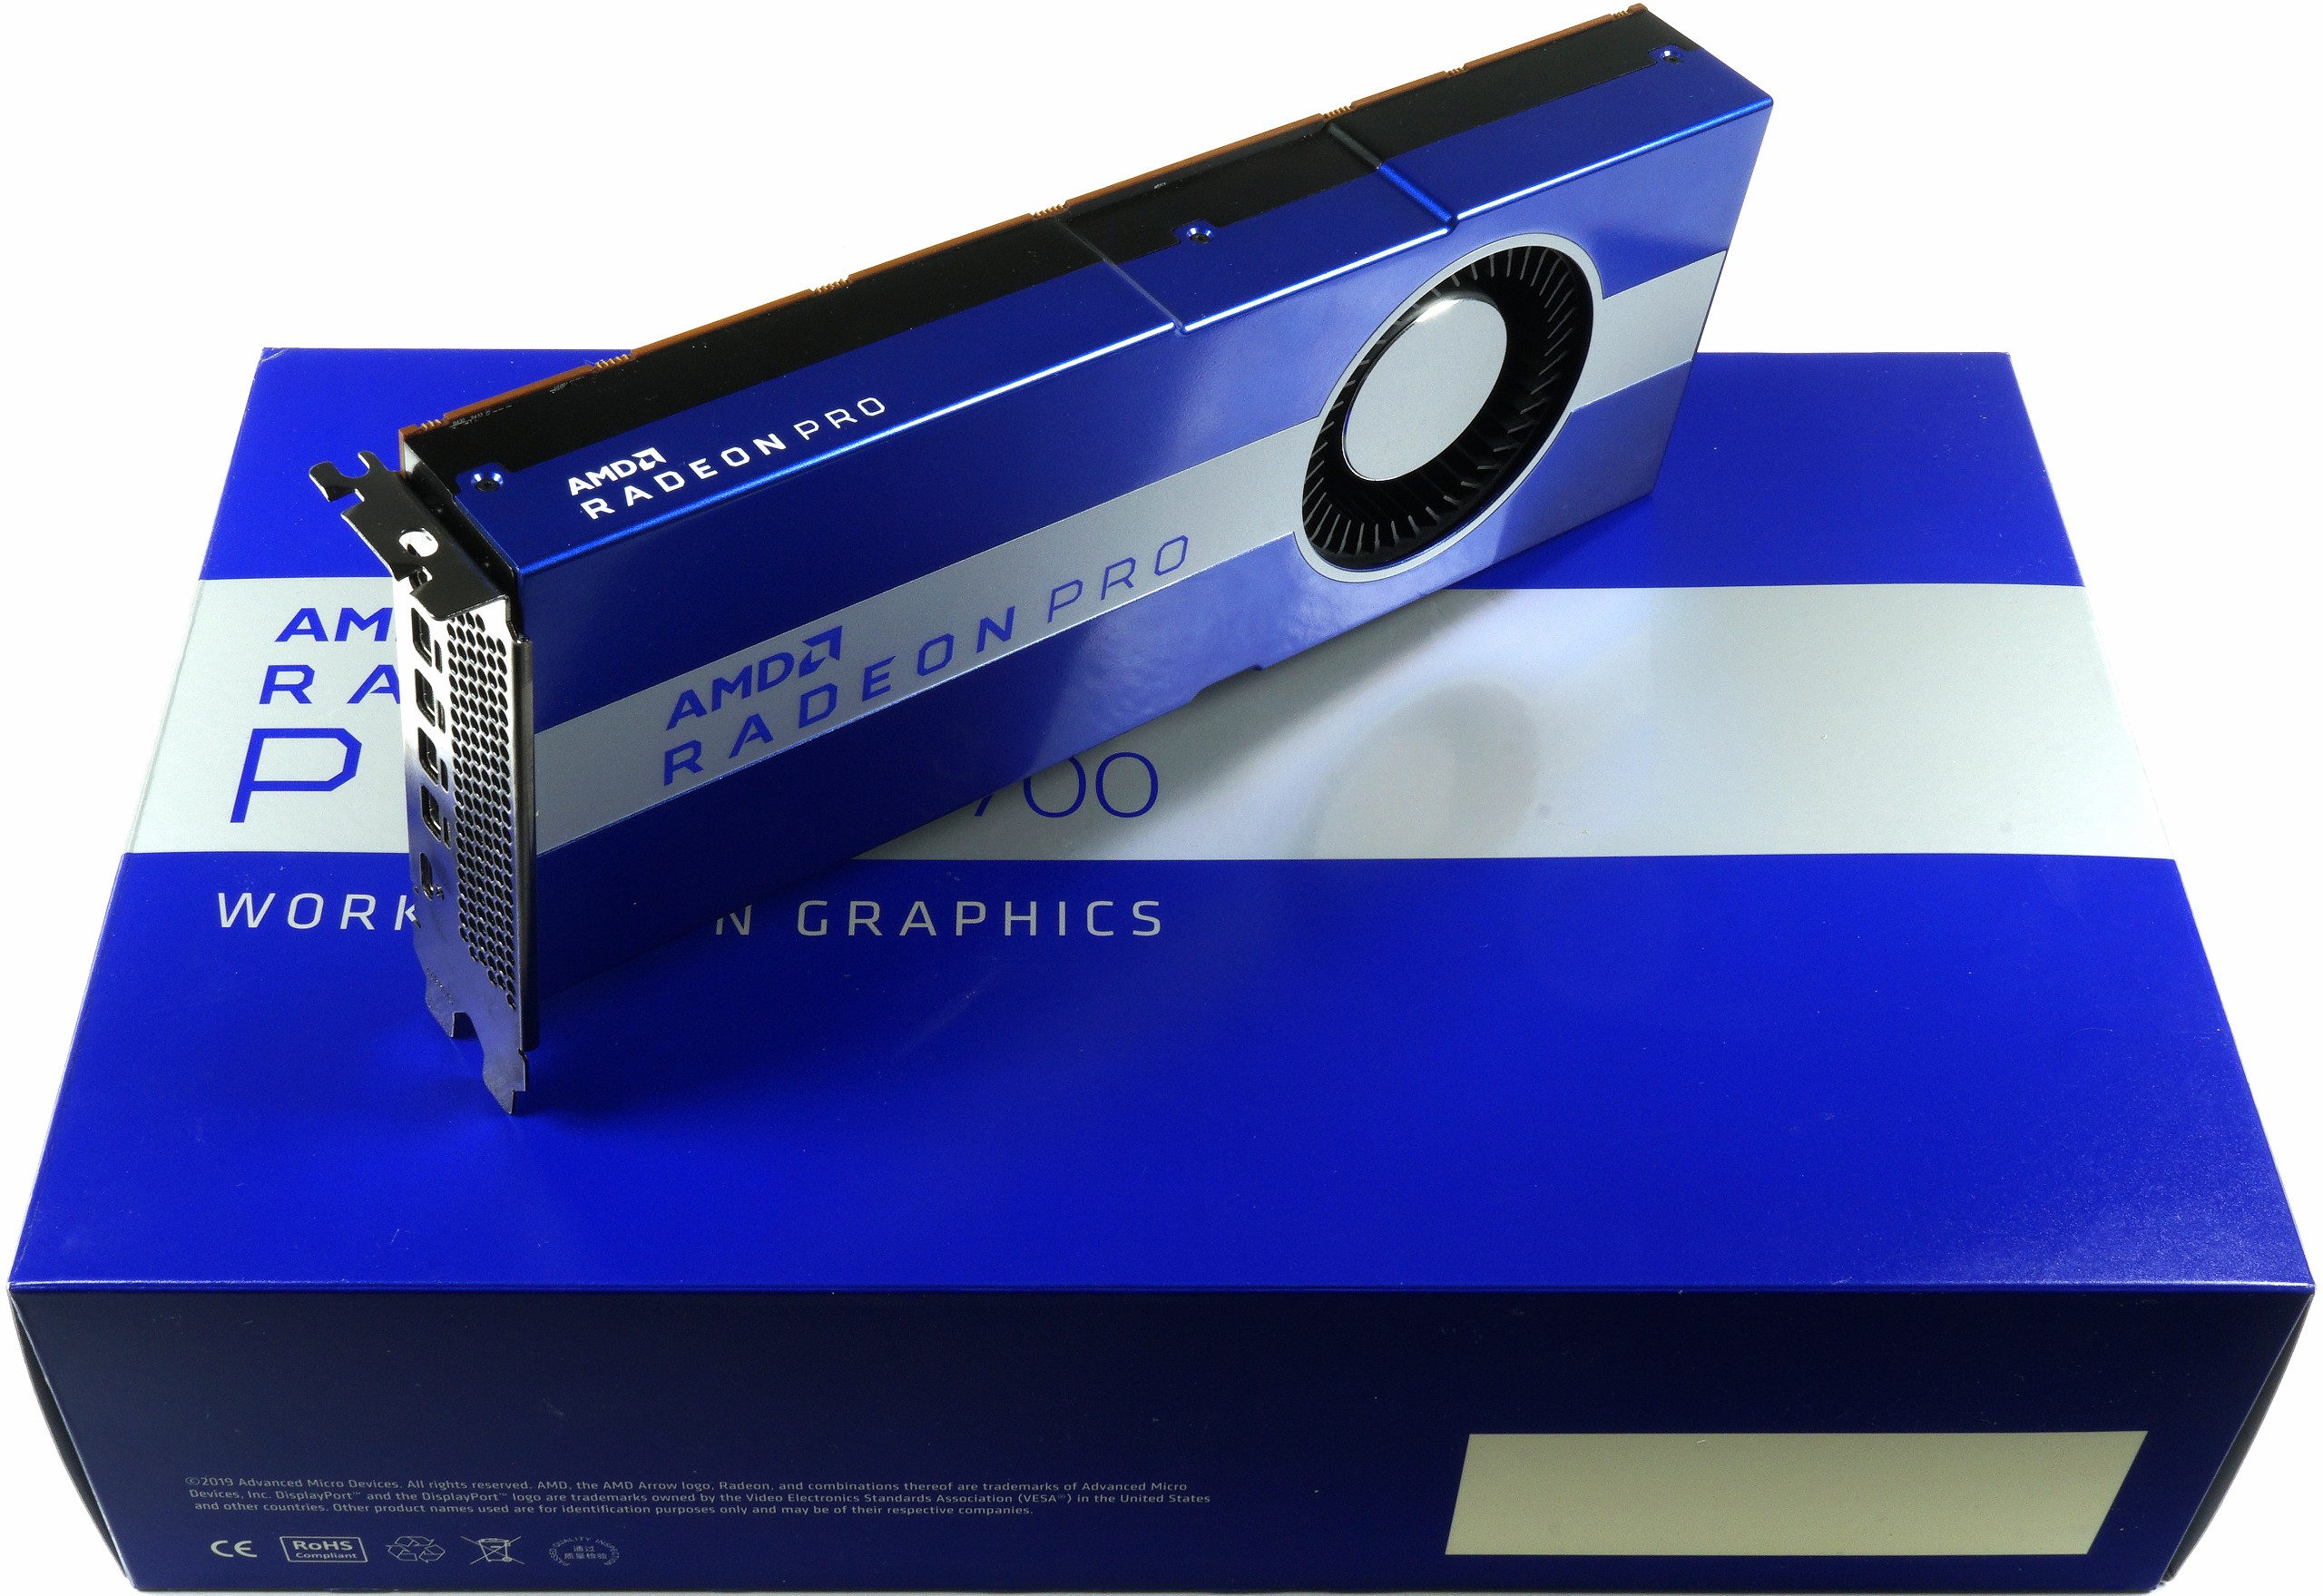 AMD Radeon Pro W5700 Review - price and performance are right, but